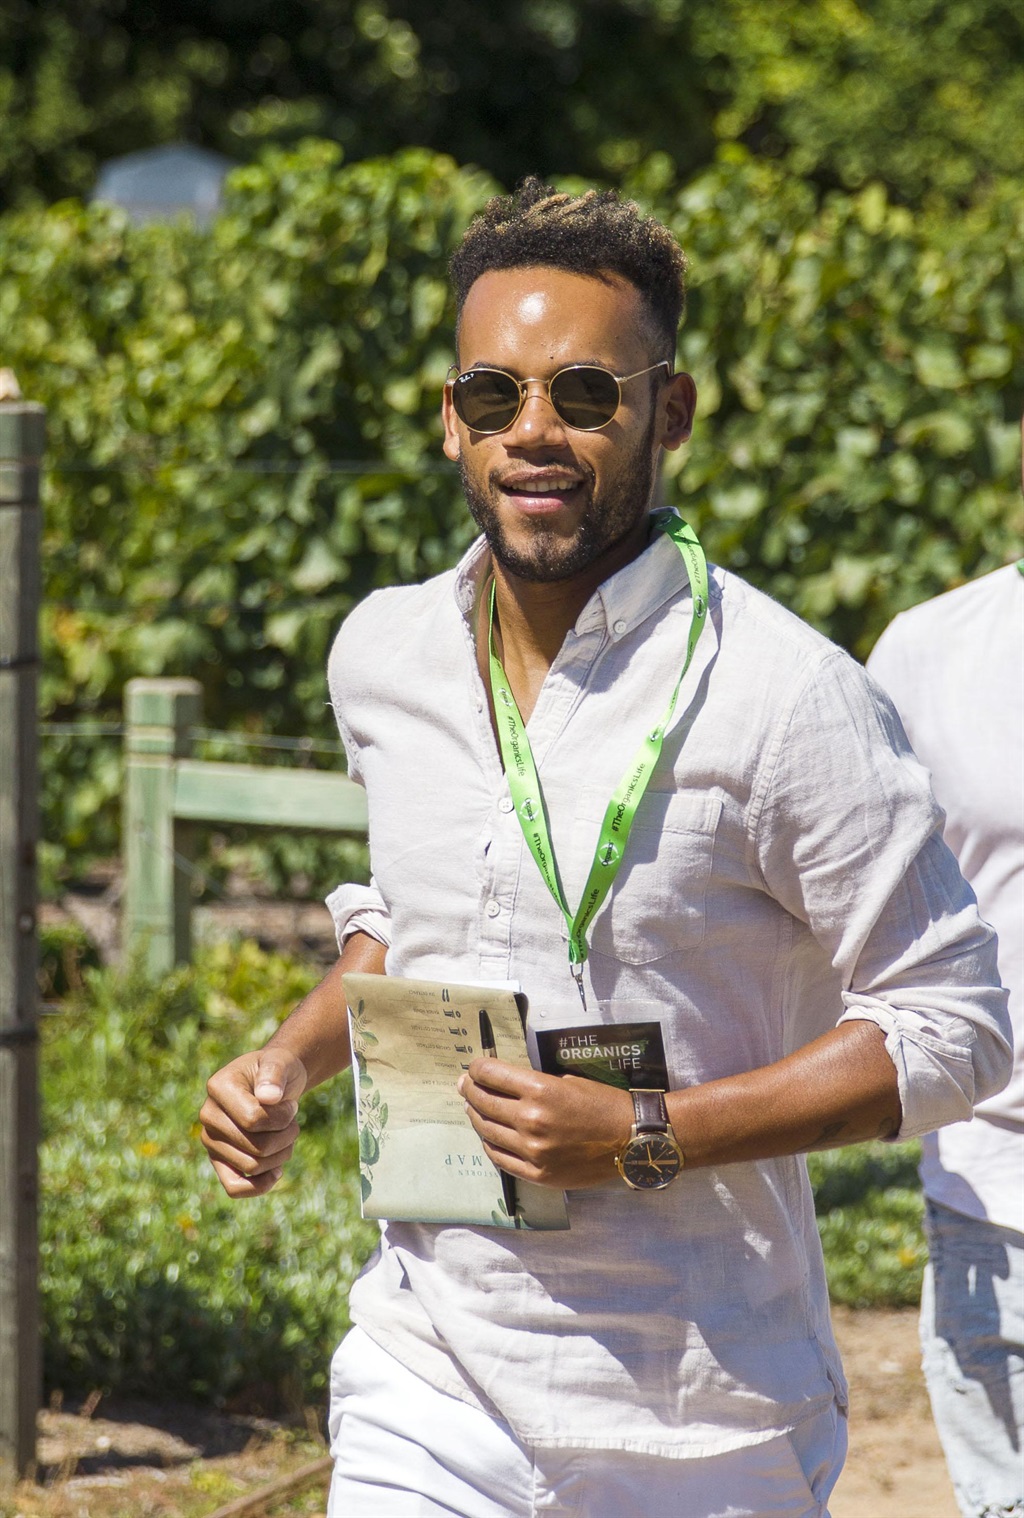 Singer Chad Saaiman leads the pack in the scavenger hunt 